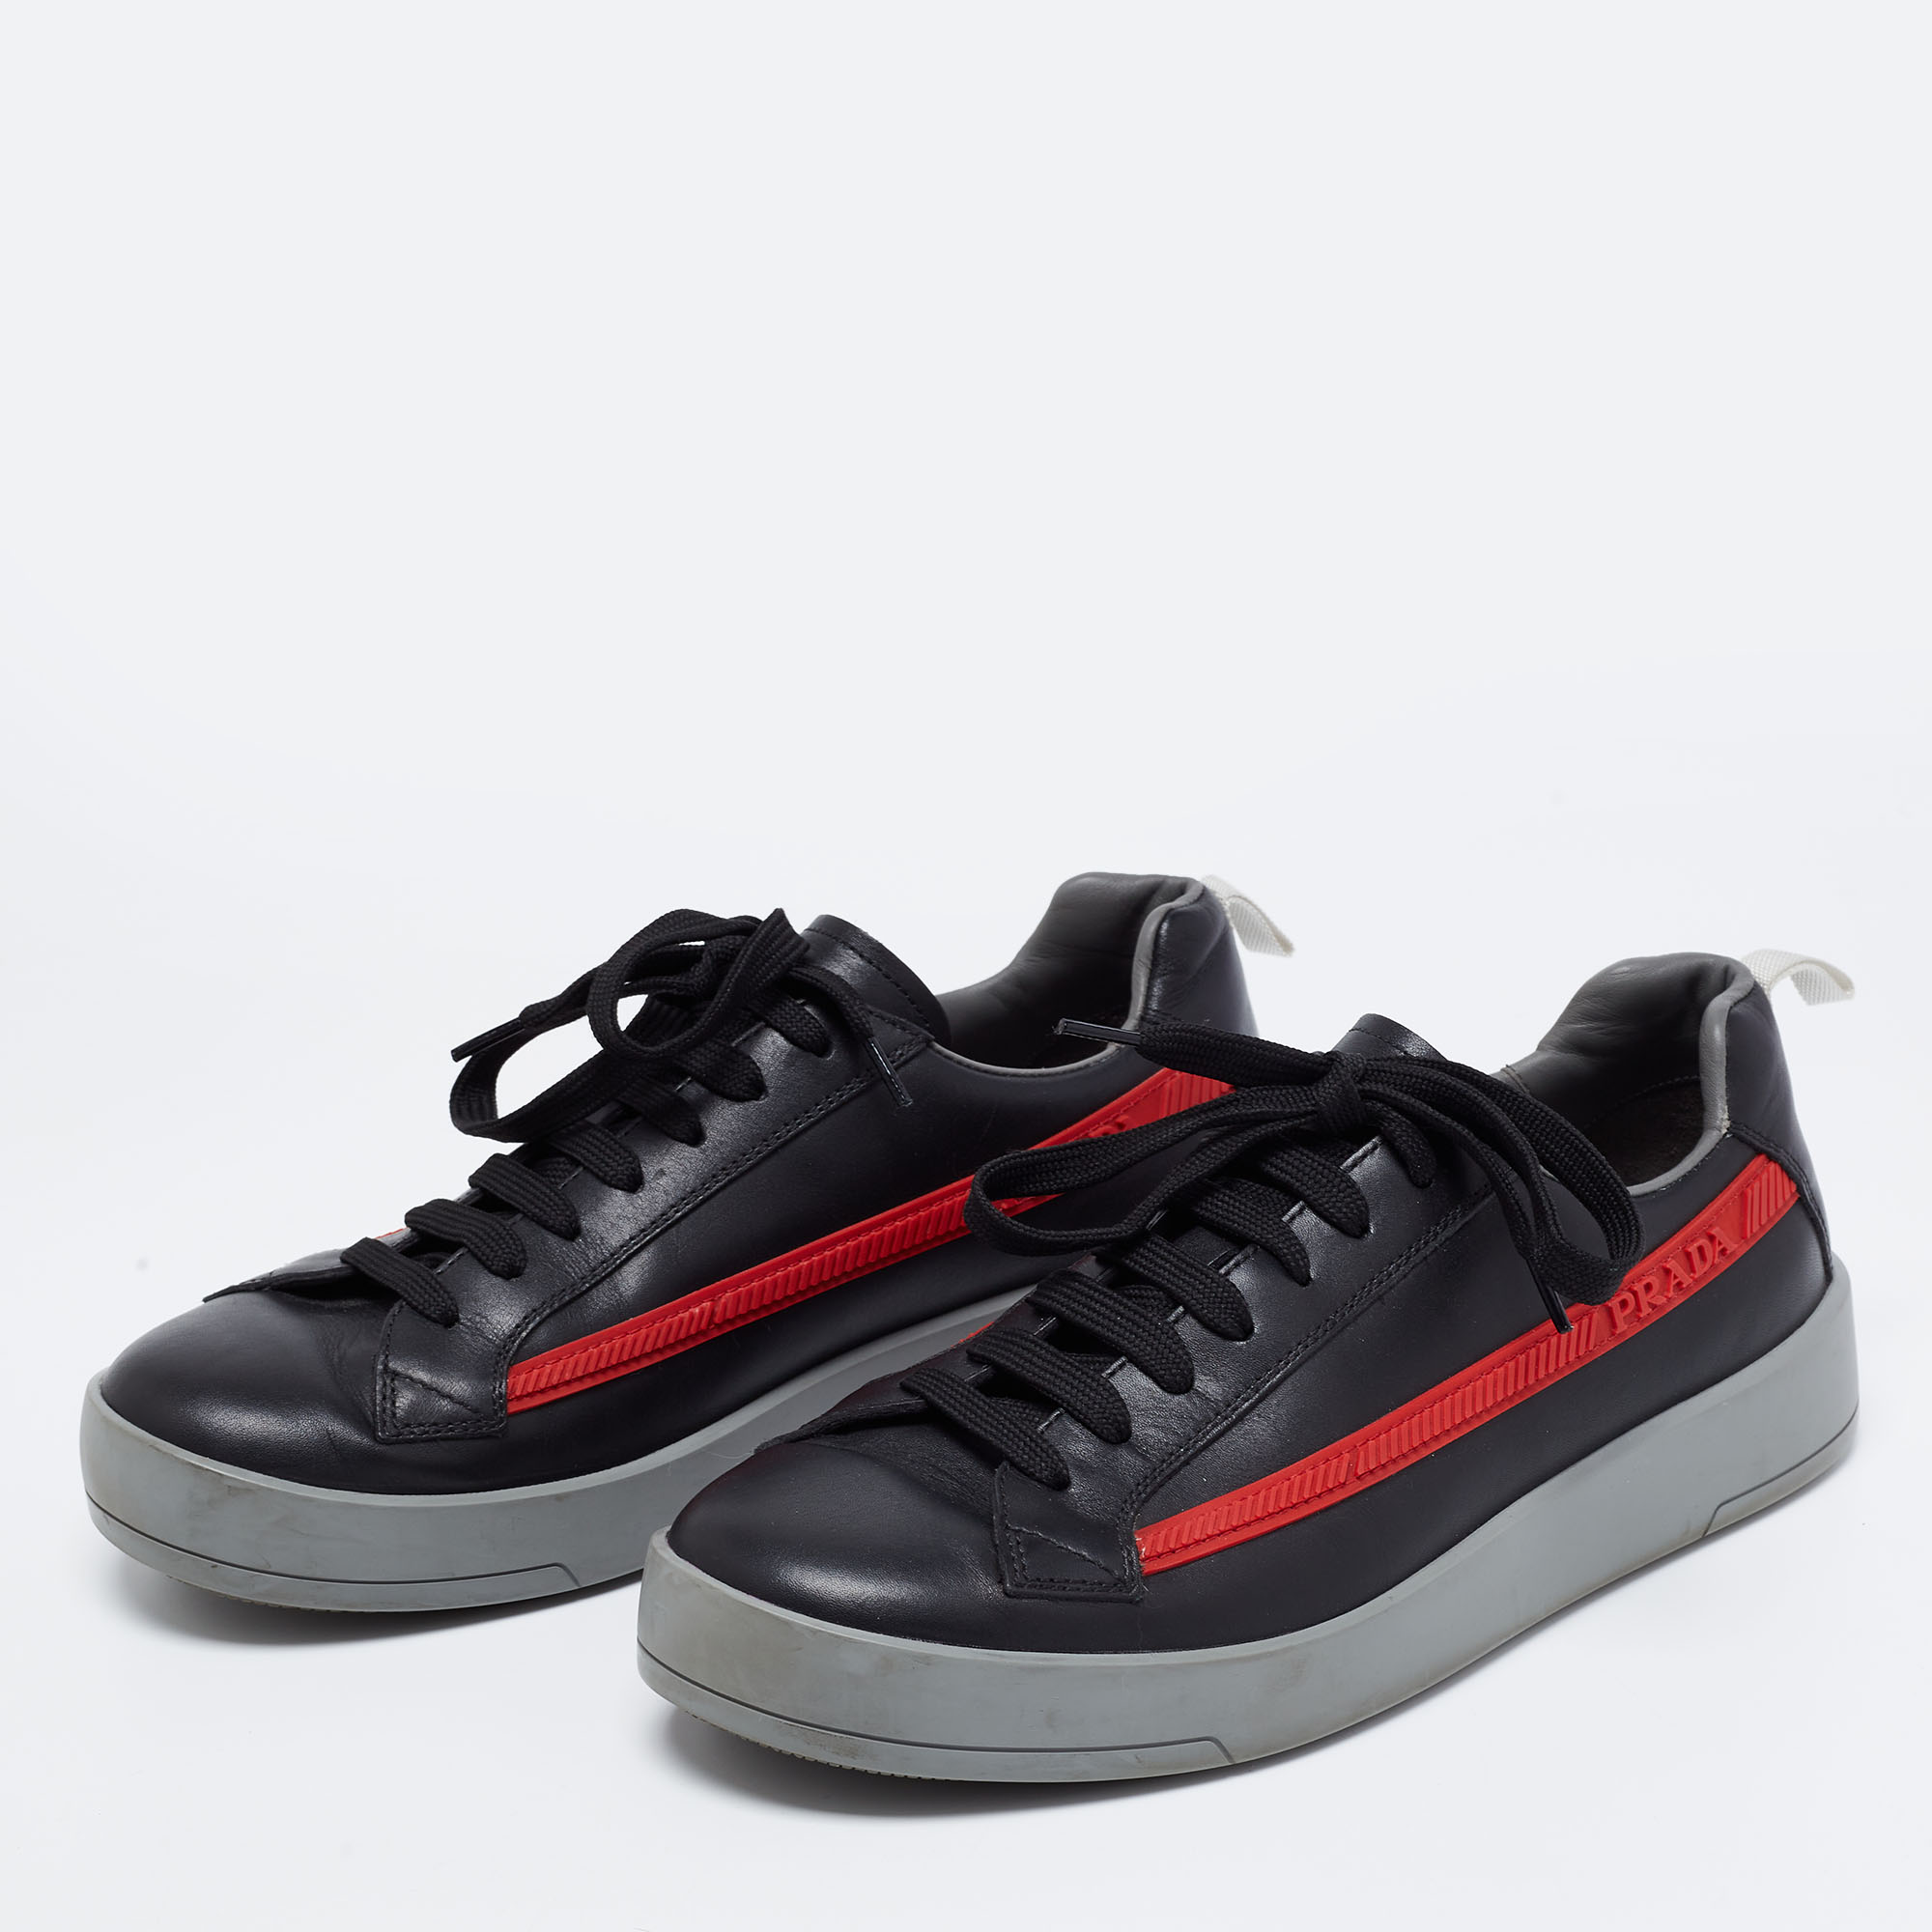 

Prada Sport Black/Red Leather and Rubber Iconic Vitello Plume Low-Top Sneakers Size